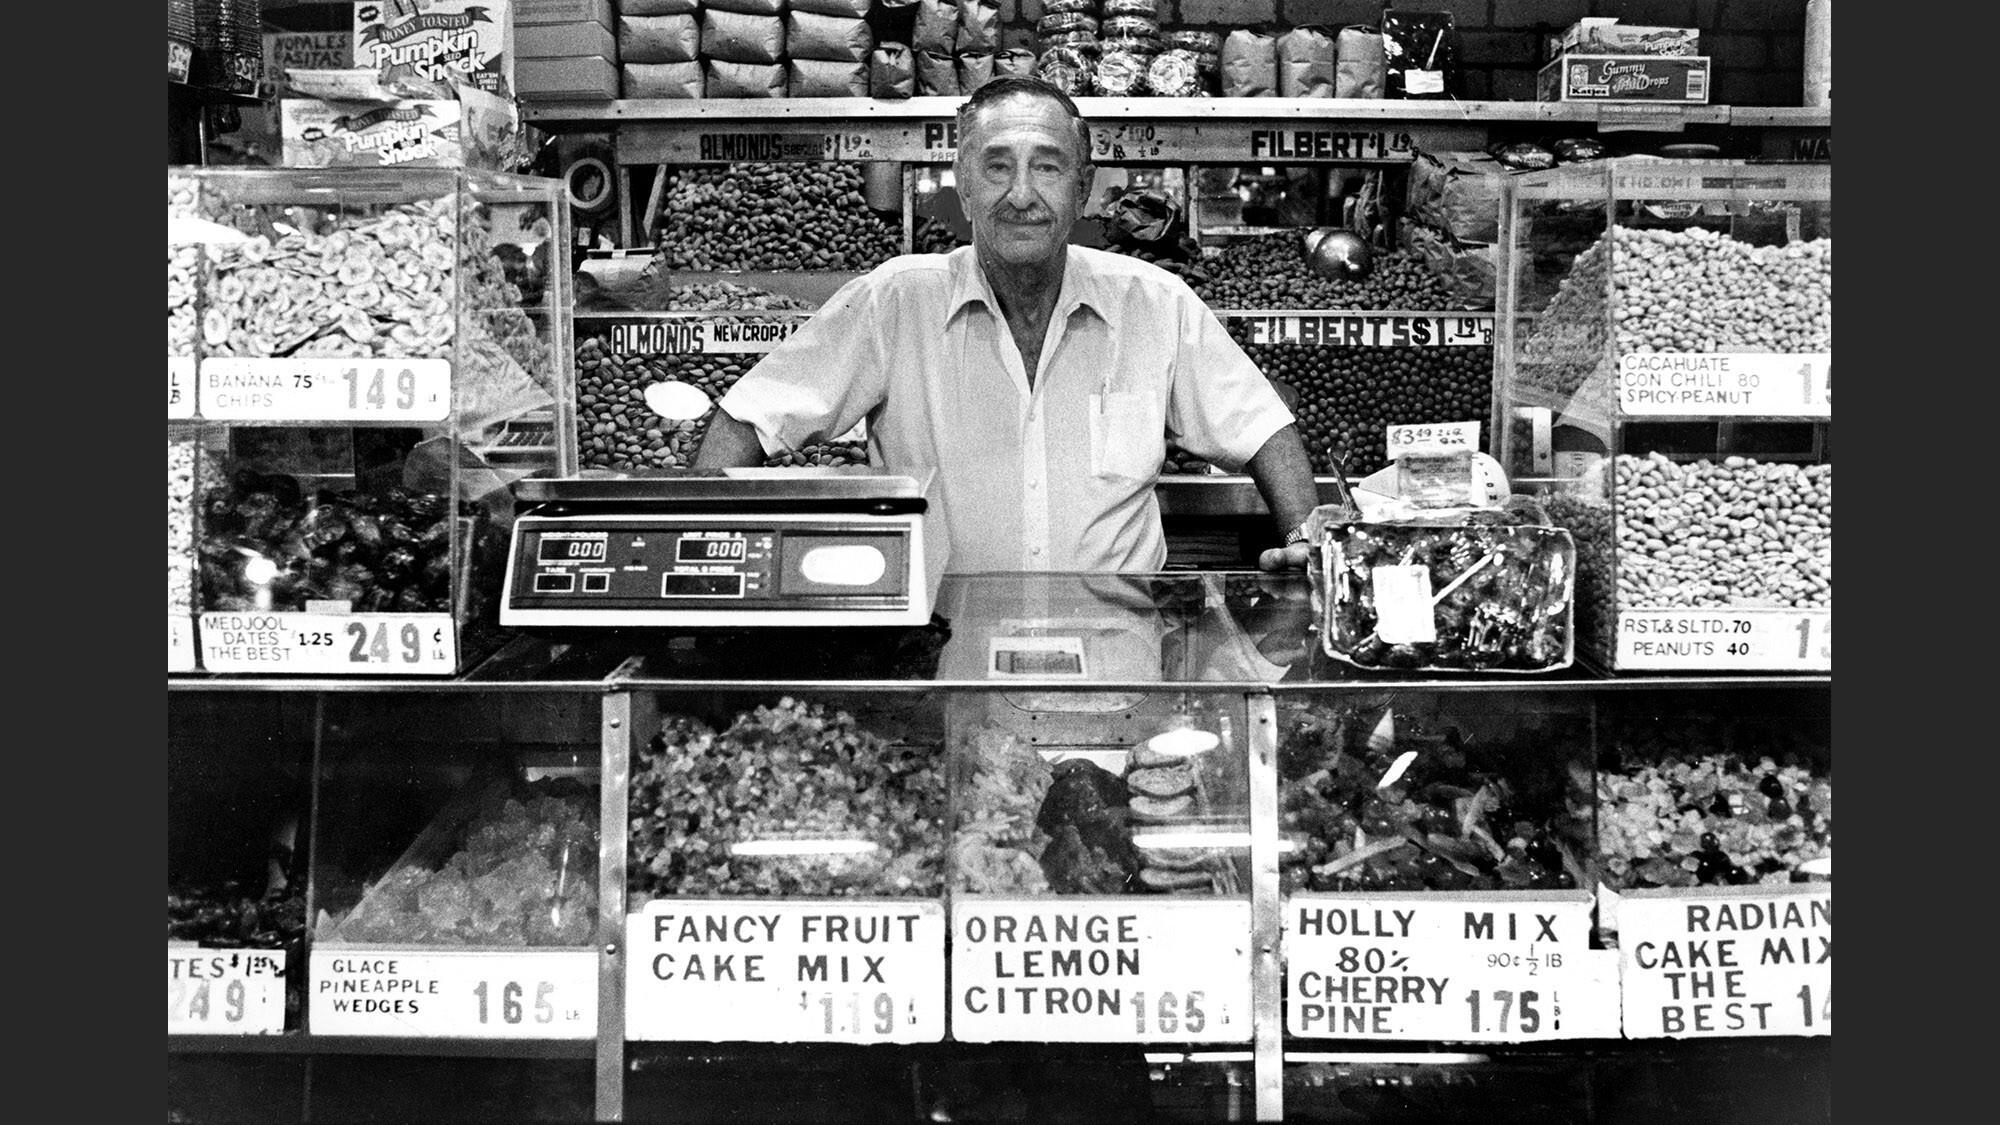 Irv Karan stands behind a shop counter, surrounded by bins of dried fruit and nuts.